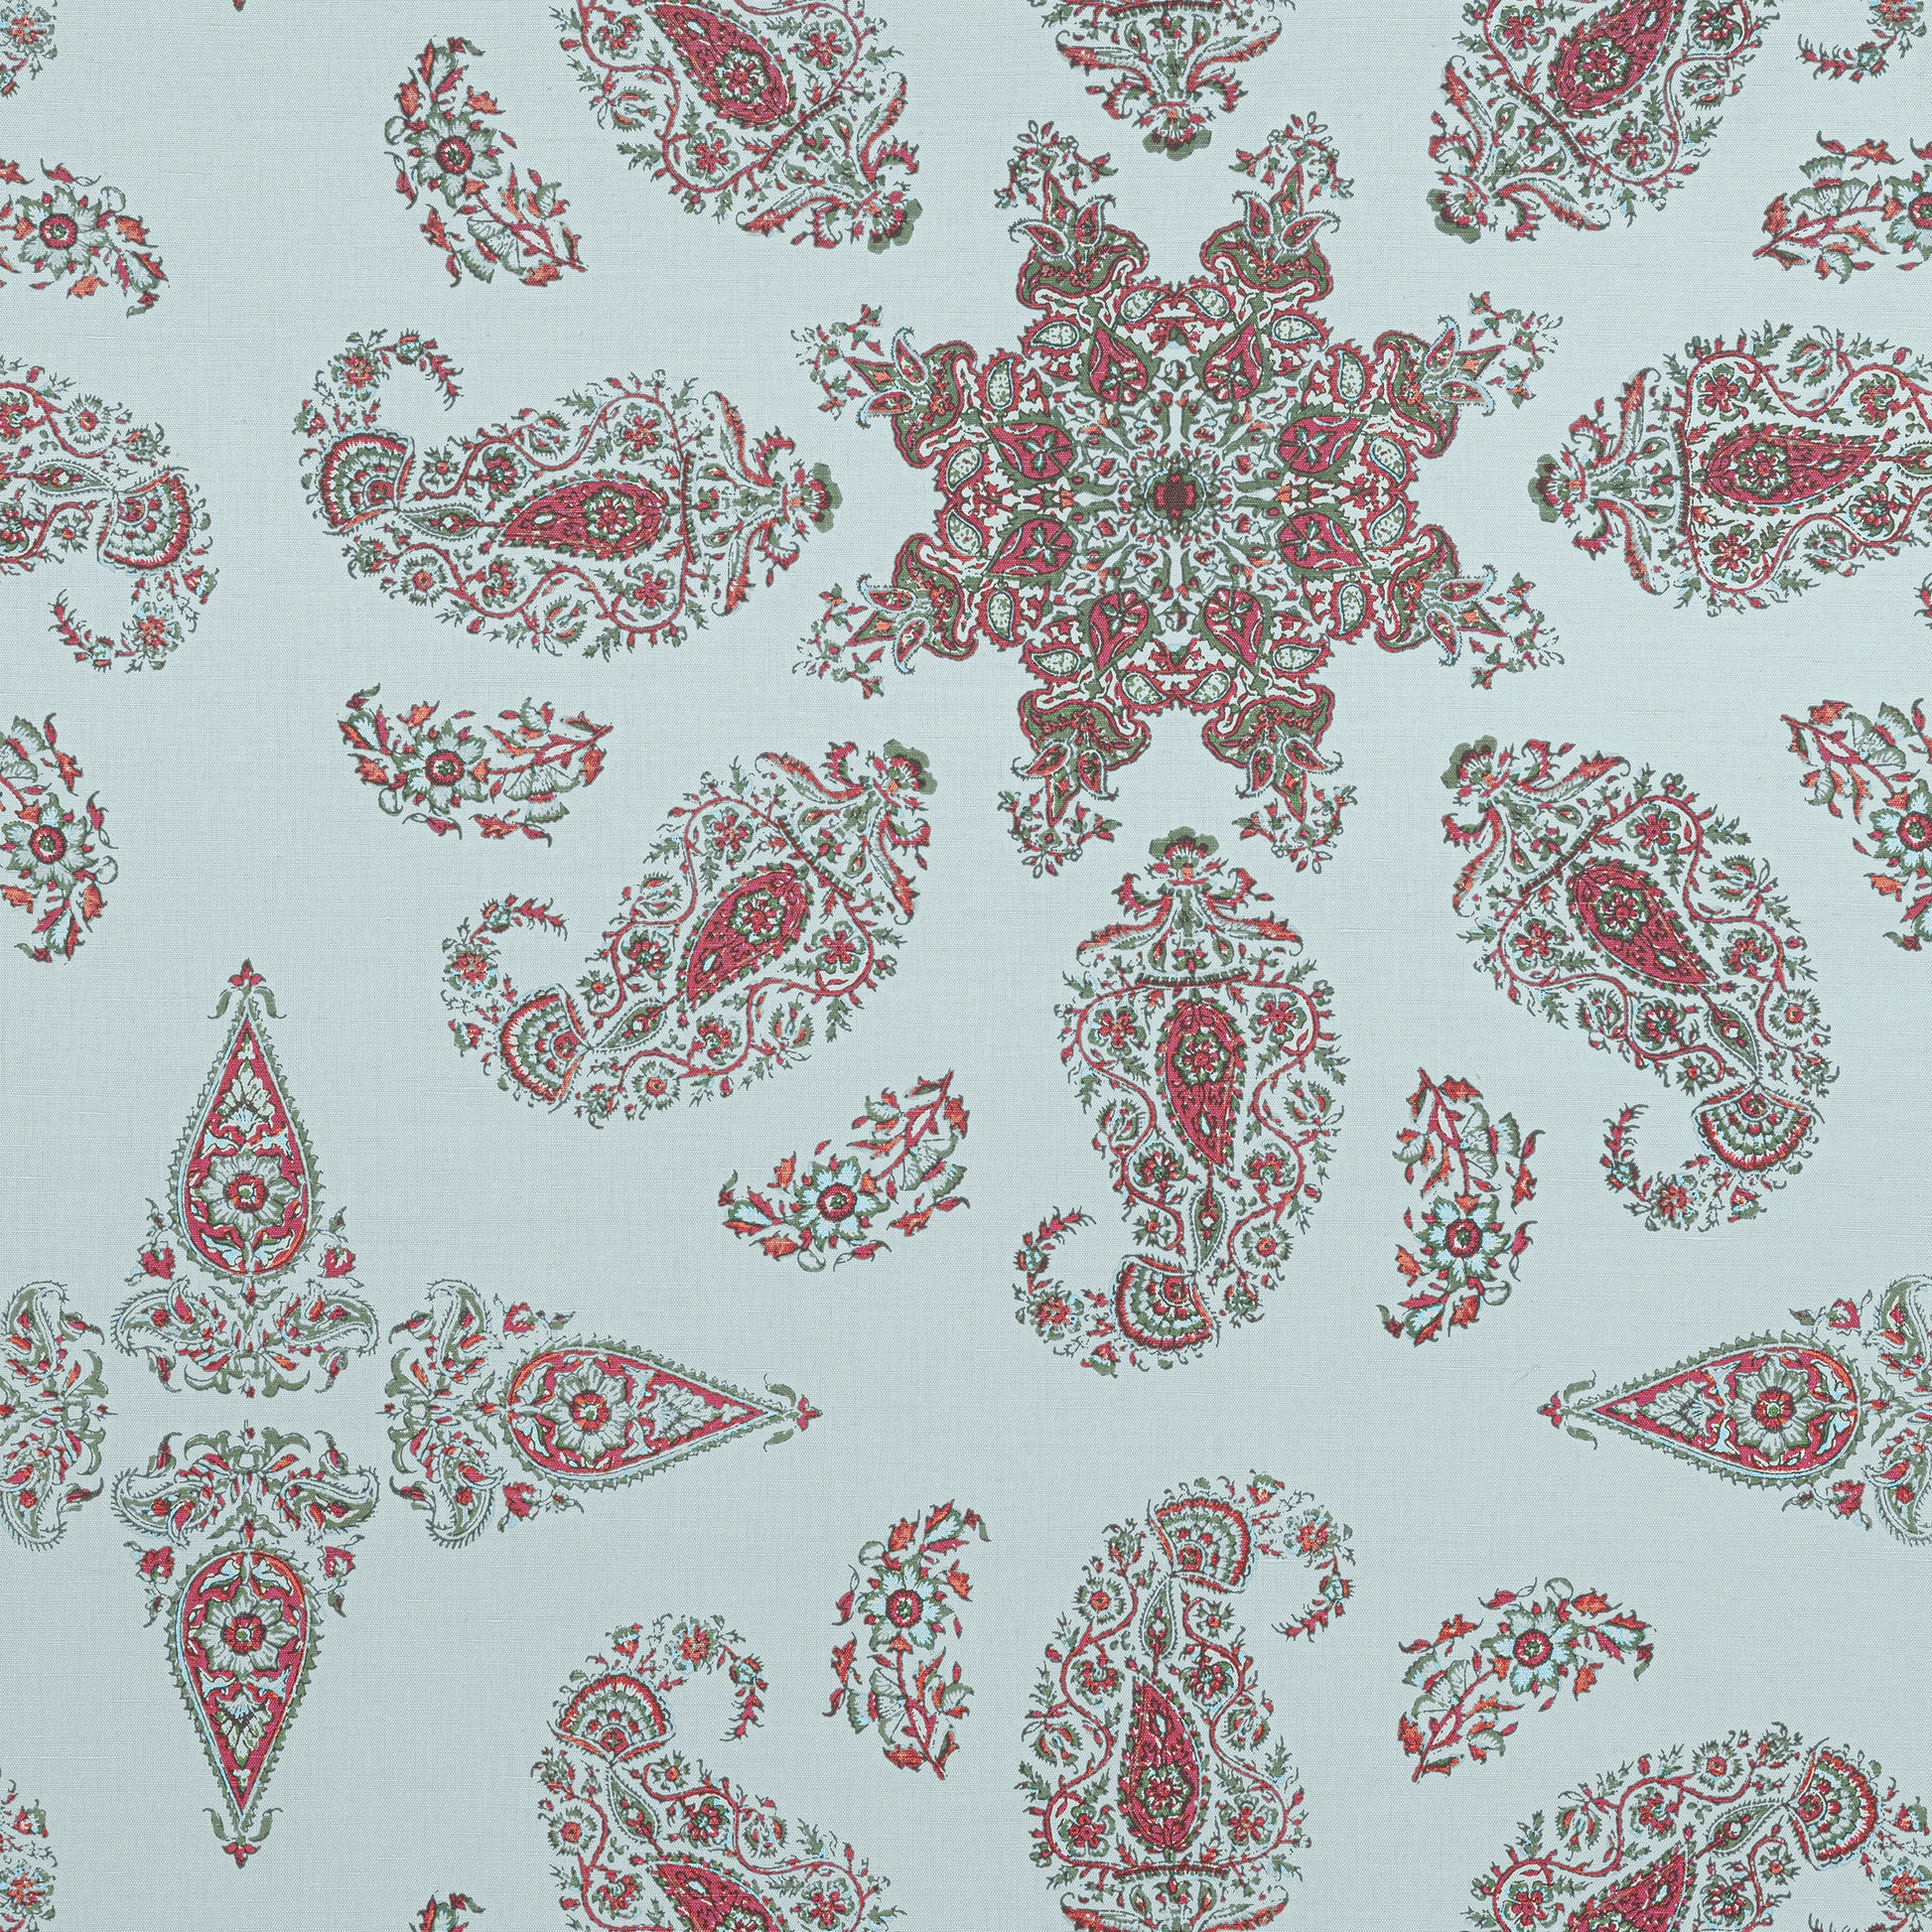 Purchase Thibaut Fabric Product# F936431 pattern name East India color Raspberry and Teal